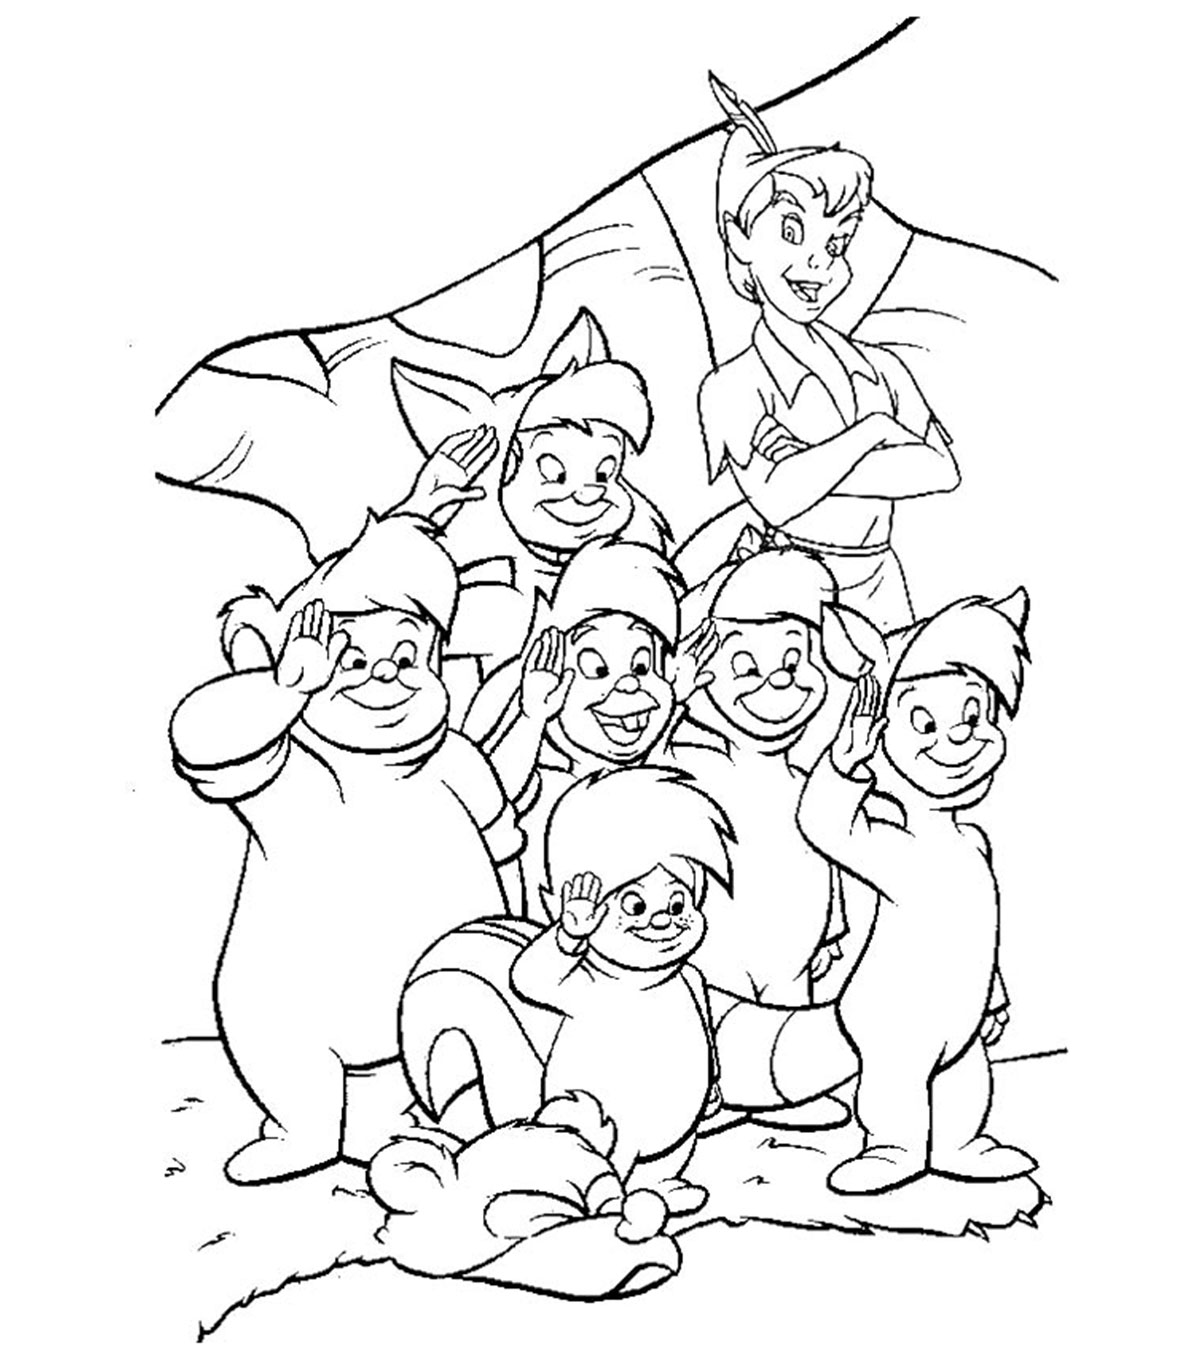 15 Best ‘Peter Pan’ Coloring Pages for Your Little Ones